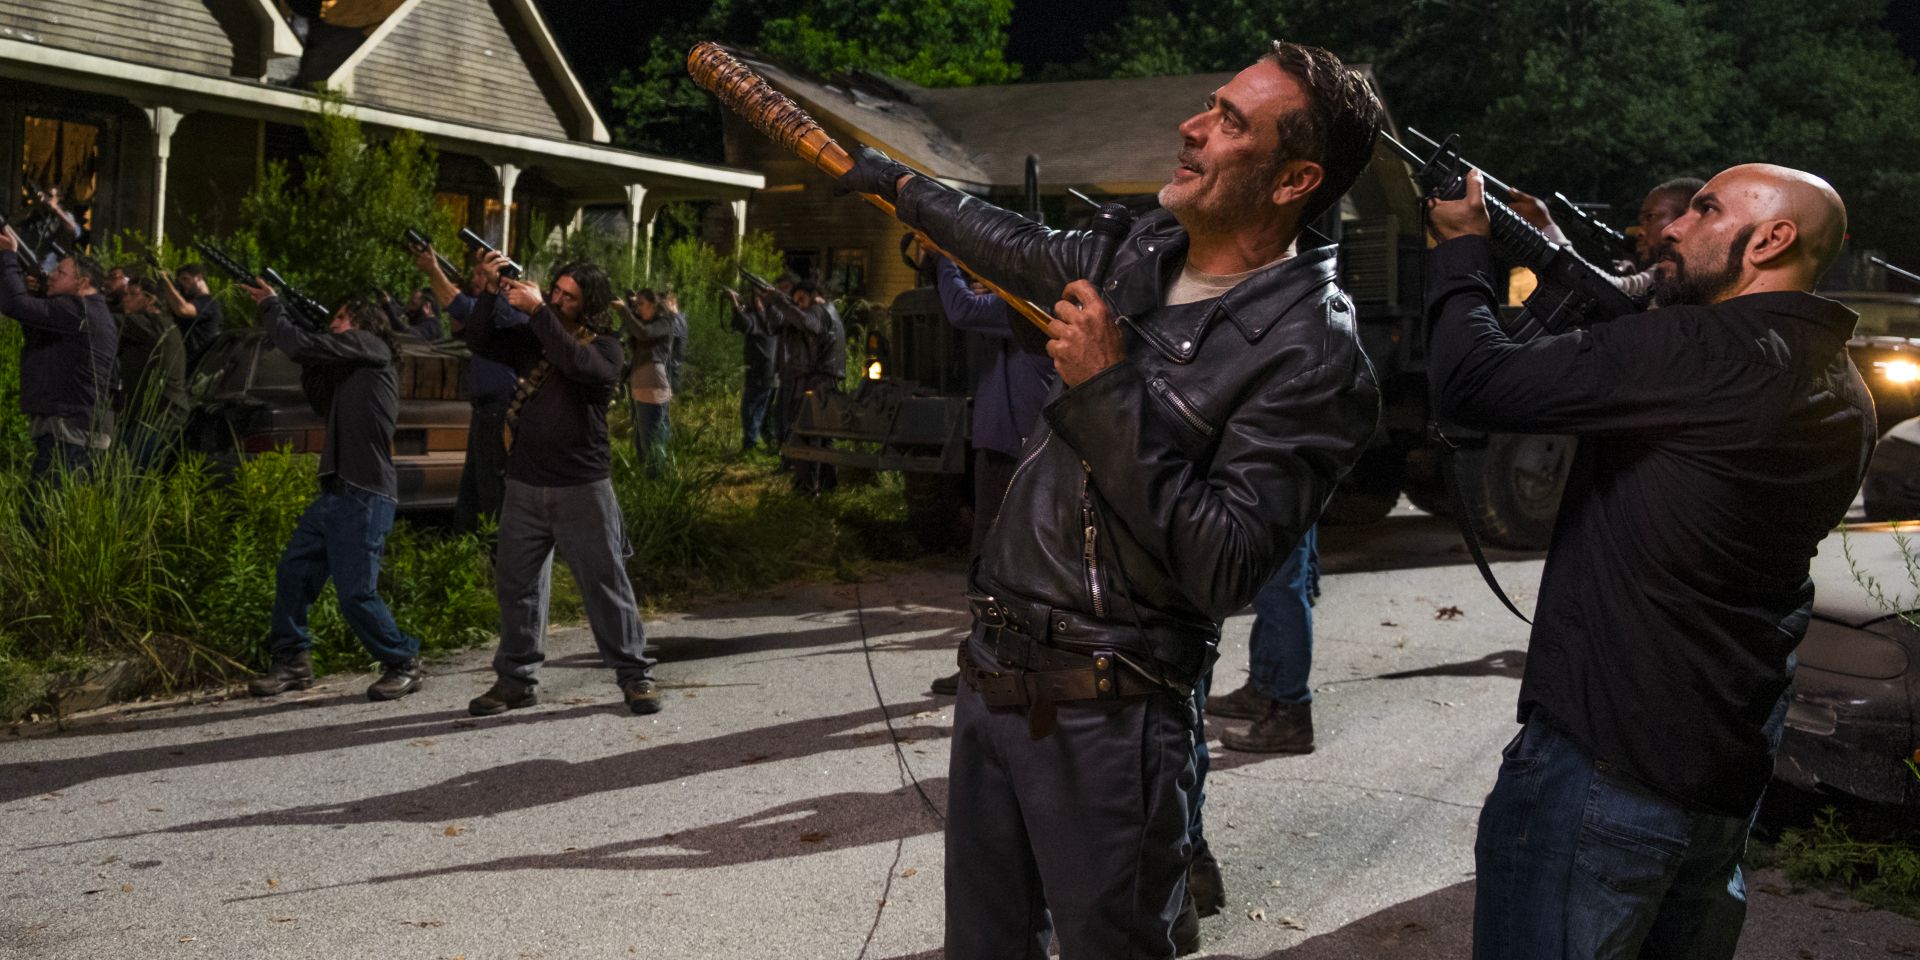 Negan (Jeffrey Dean Morgan) leads his soldiers in an attack on Alexandria while issuing demands into a loudspeaker.